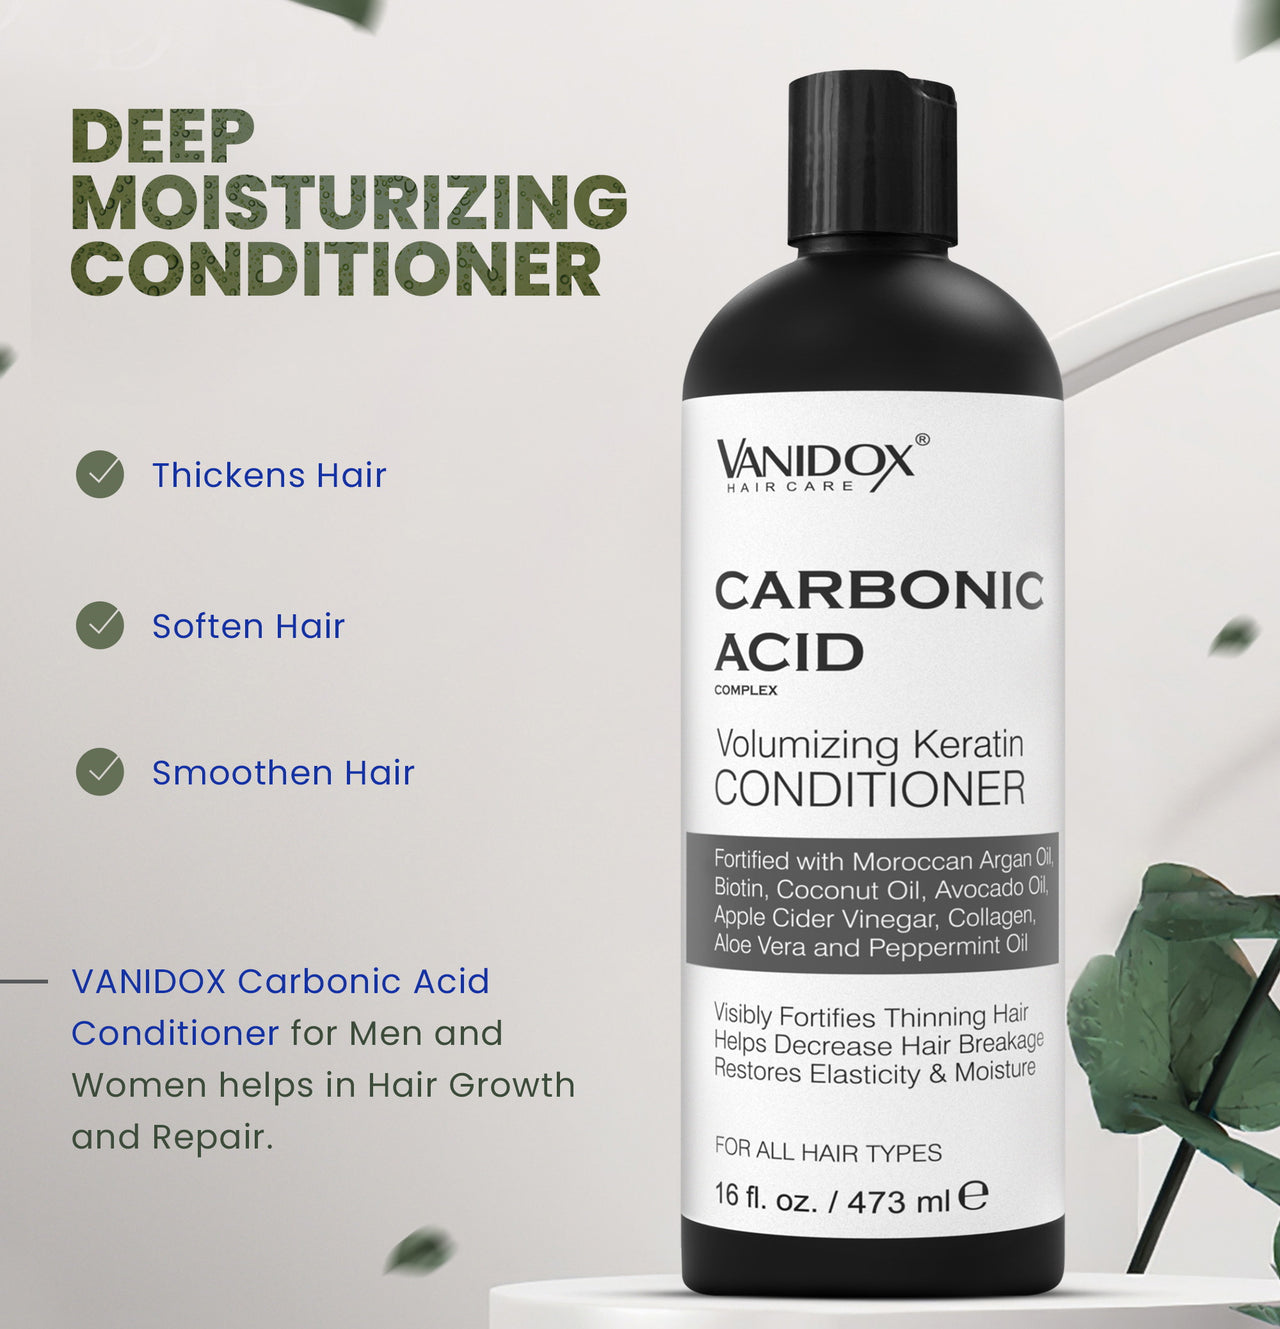 Carbonic Acid Shampoo and Conditioner | Revitalizes Hair Growth | Scalp Soothing Formula | Washes away Dandruff